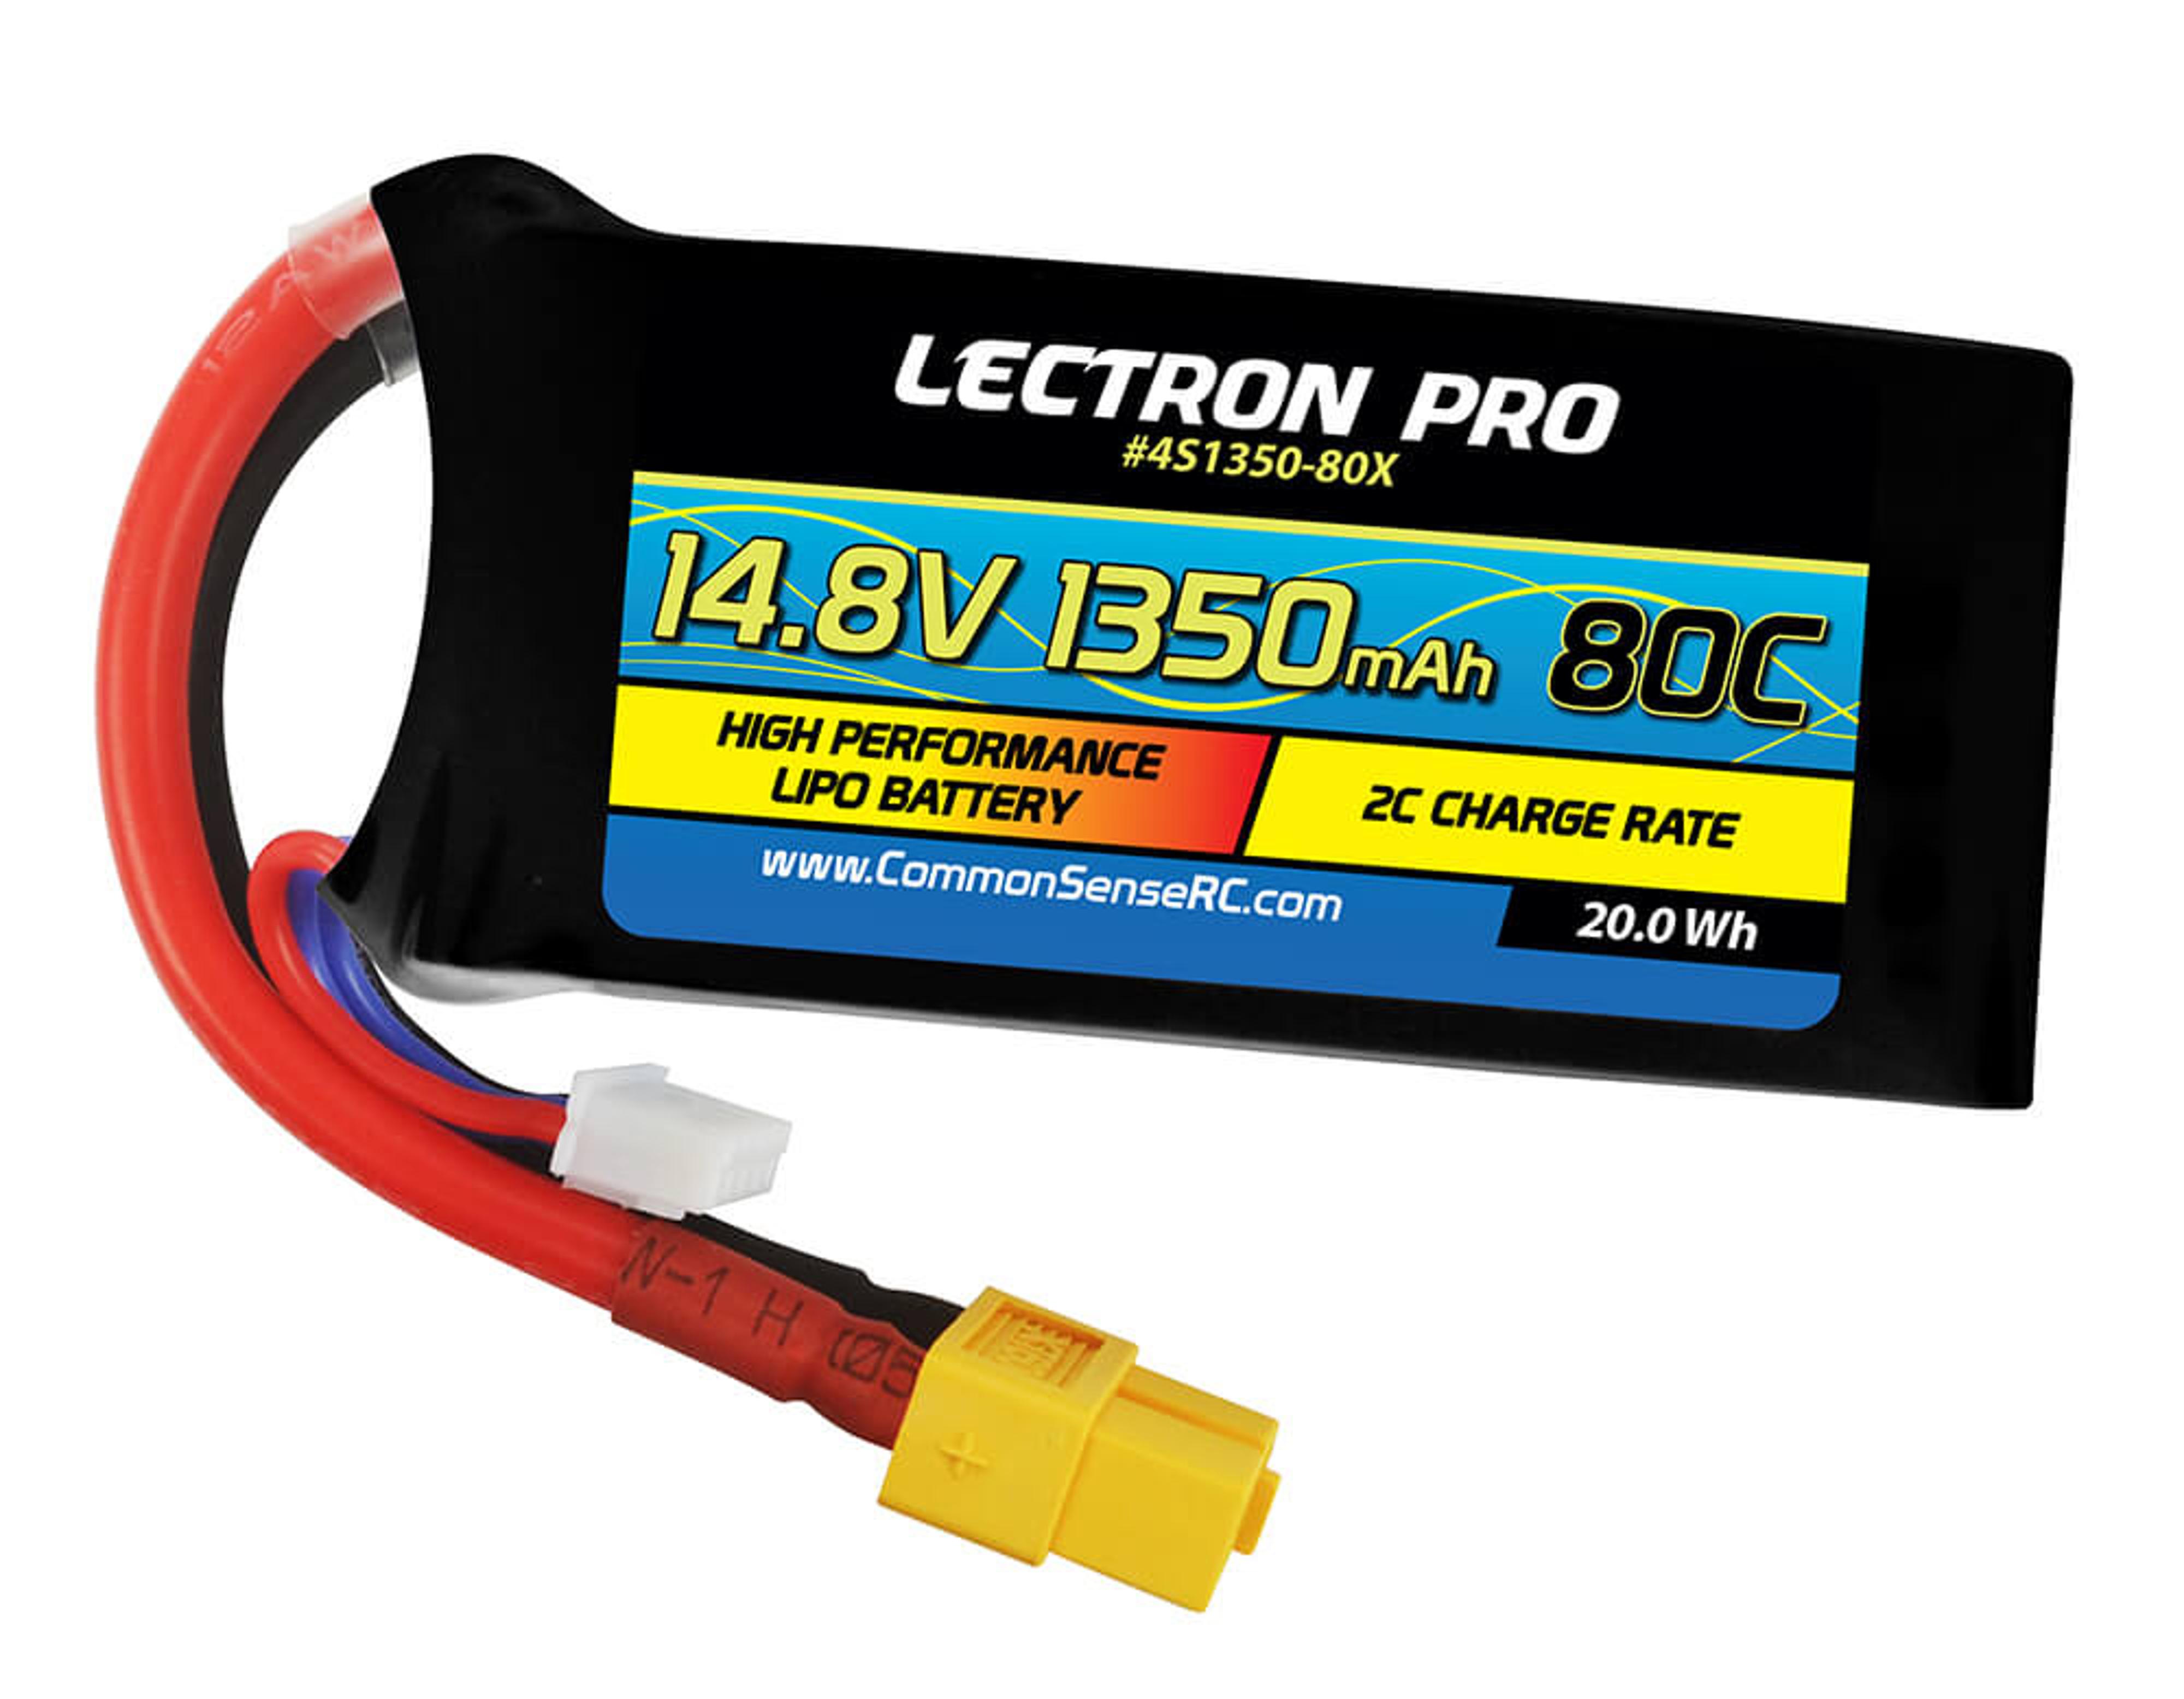 Lectron Pro 14.8v 1350mh 80C LiPo Battery w/ XT60 Connector for FPV Racers